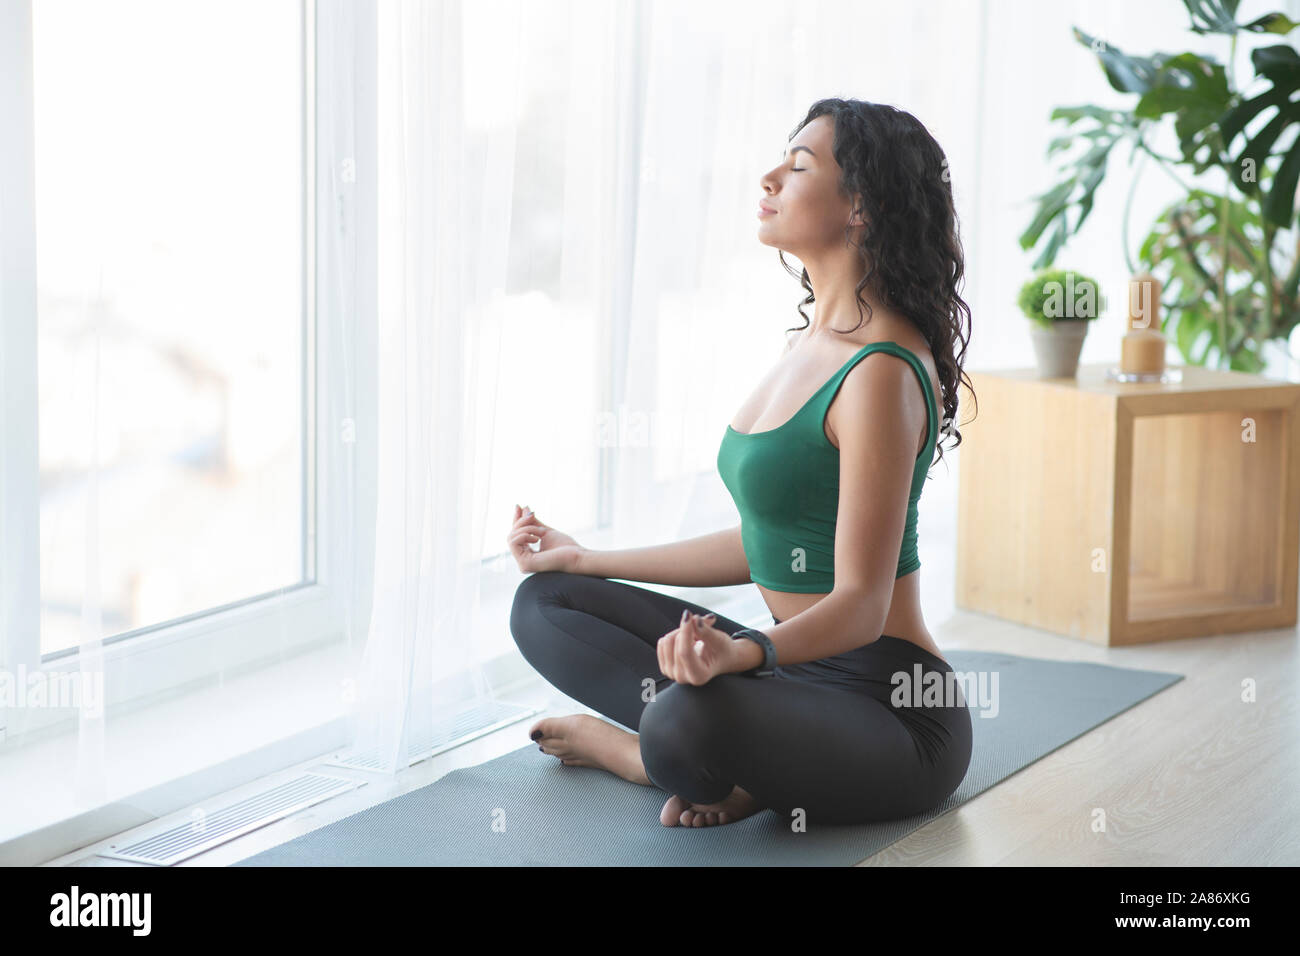 Young woman practicing yoga in lotus position Banque D'Images